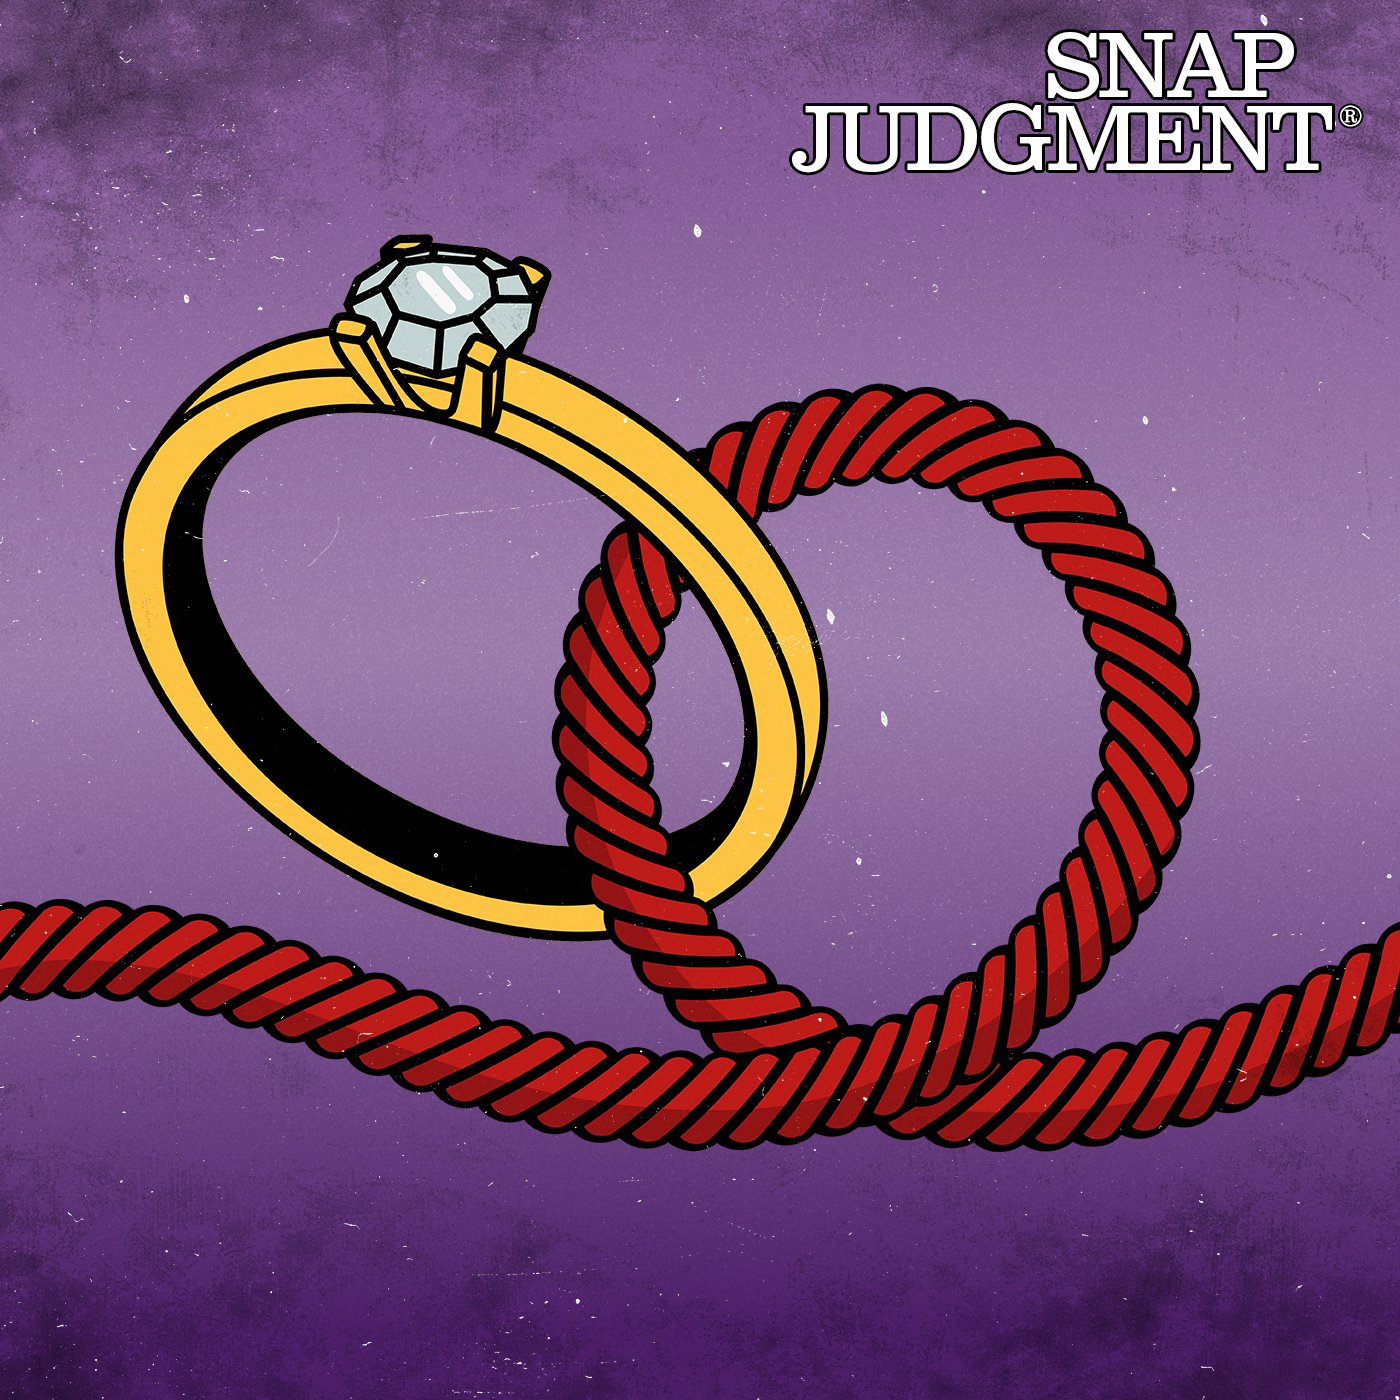 Thumbnail for "The Loophole - Snap Classic".